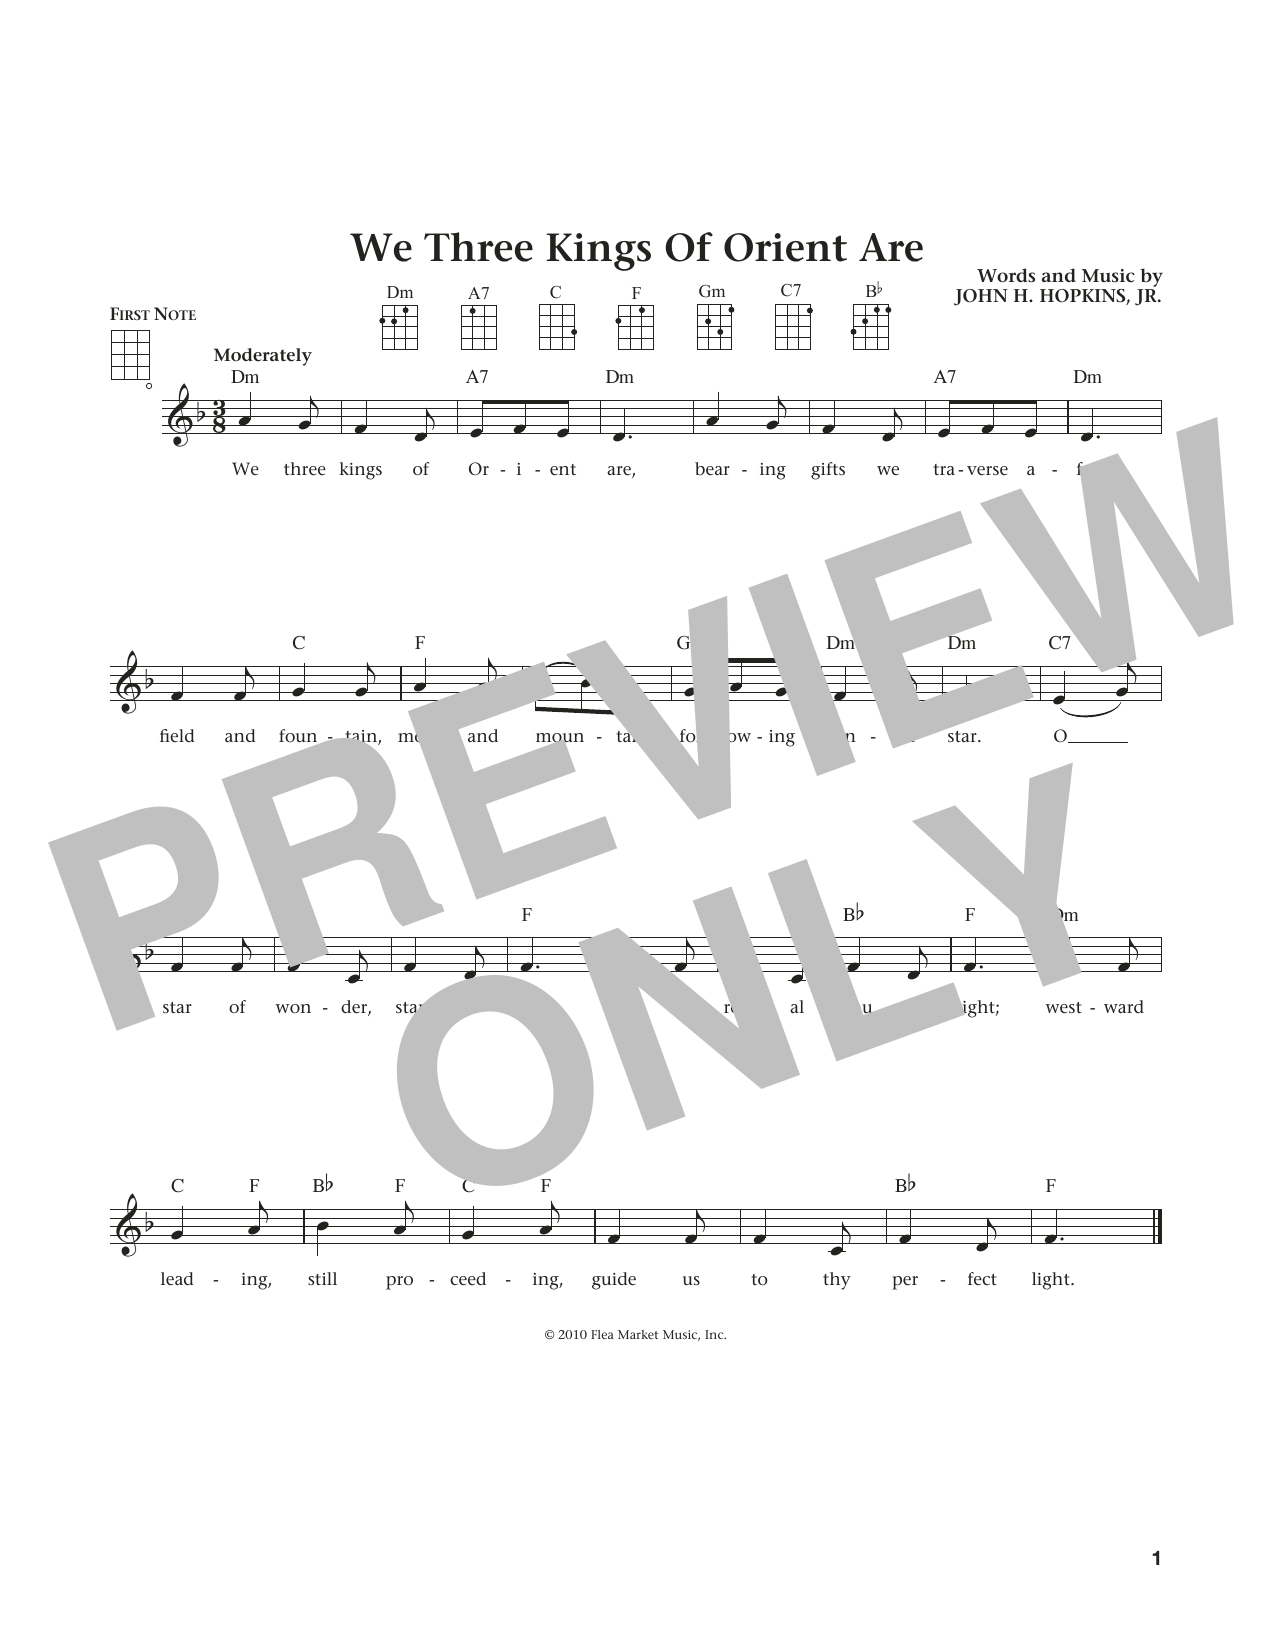 Download John H. Hopkins, Jr. We Three Kings Of Orient Are (from The Sheet Music